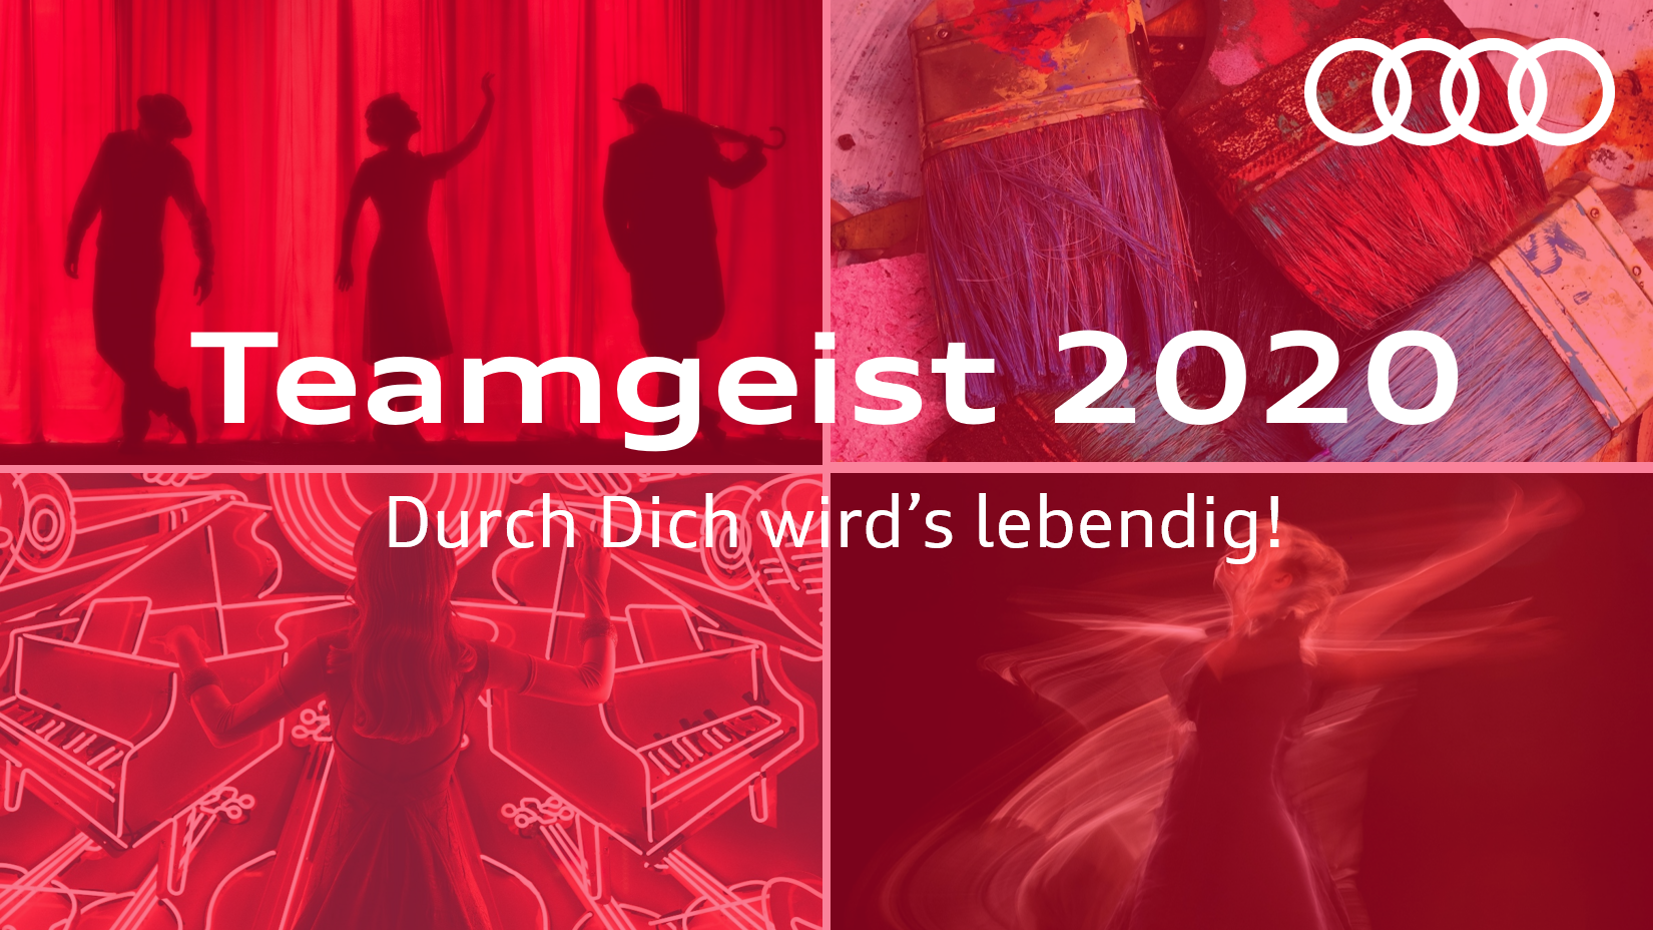 The motto of the “Team Spirit 2020” campaign: Durch Dich wird’s lebendig! (You bring culture to life!)